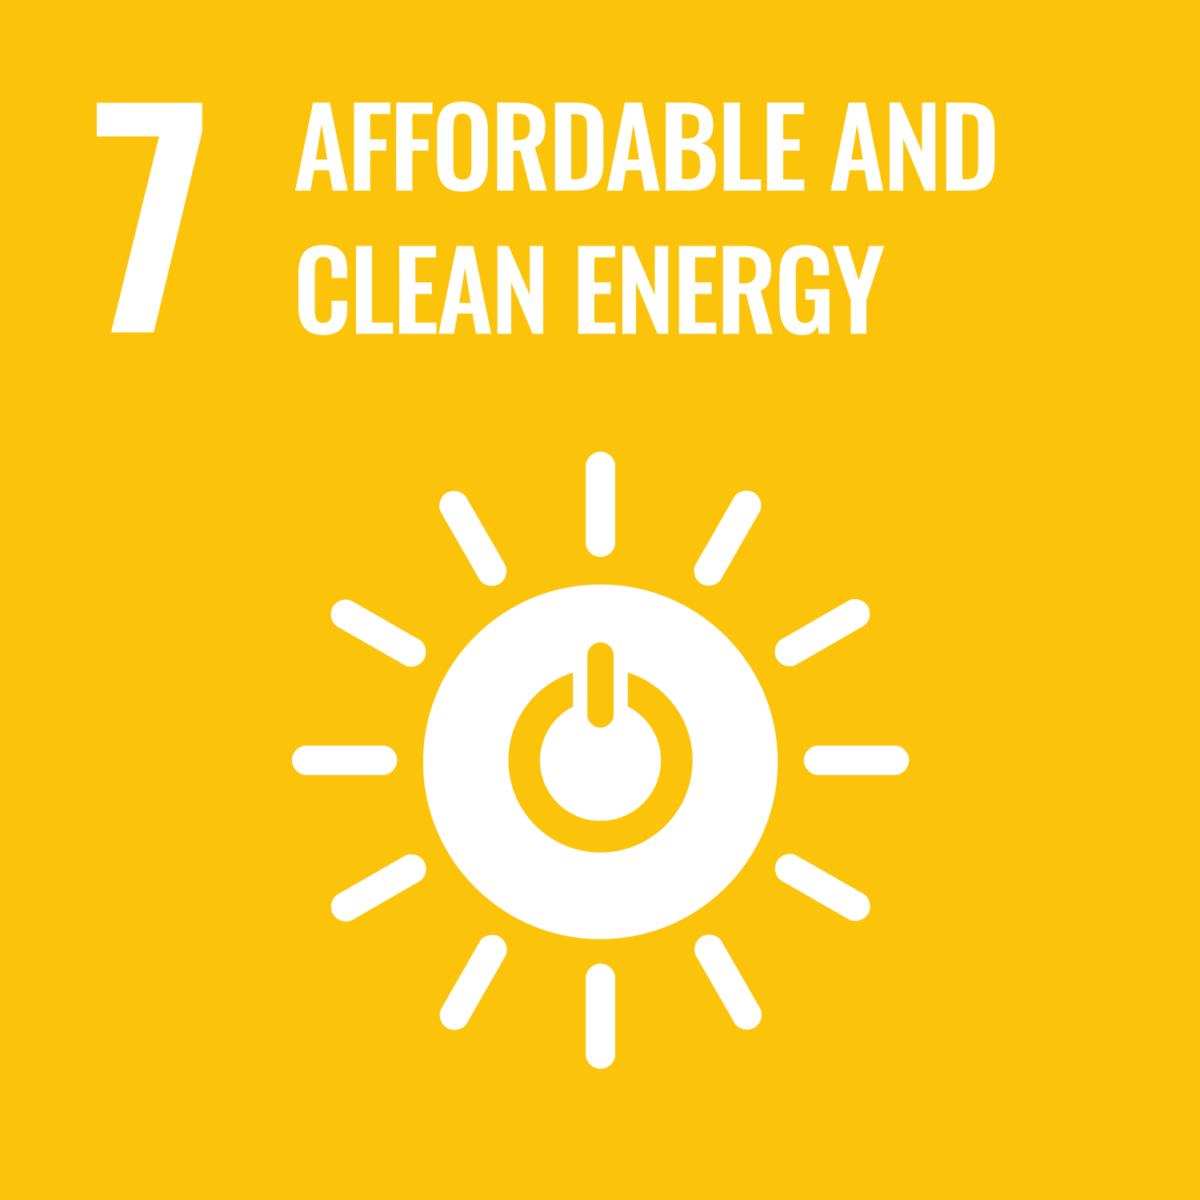 UN Sustainable Development Goal 7: Affordable and Clean Energy